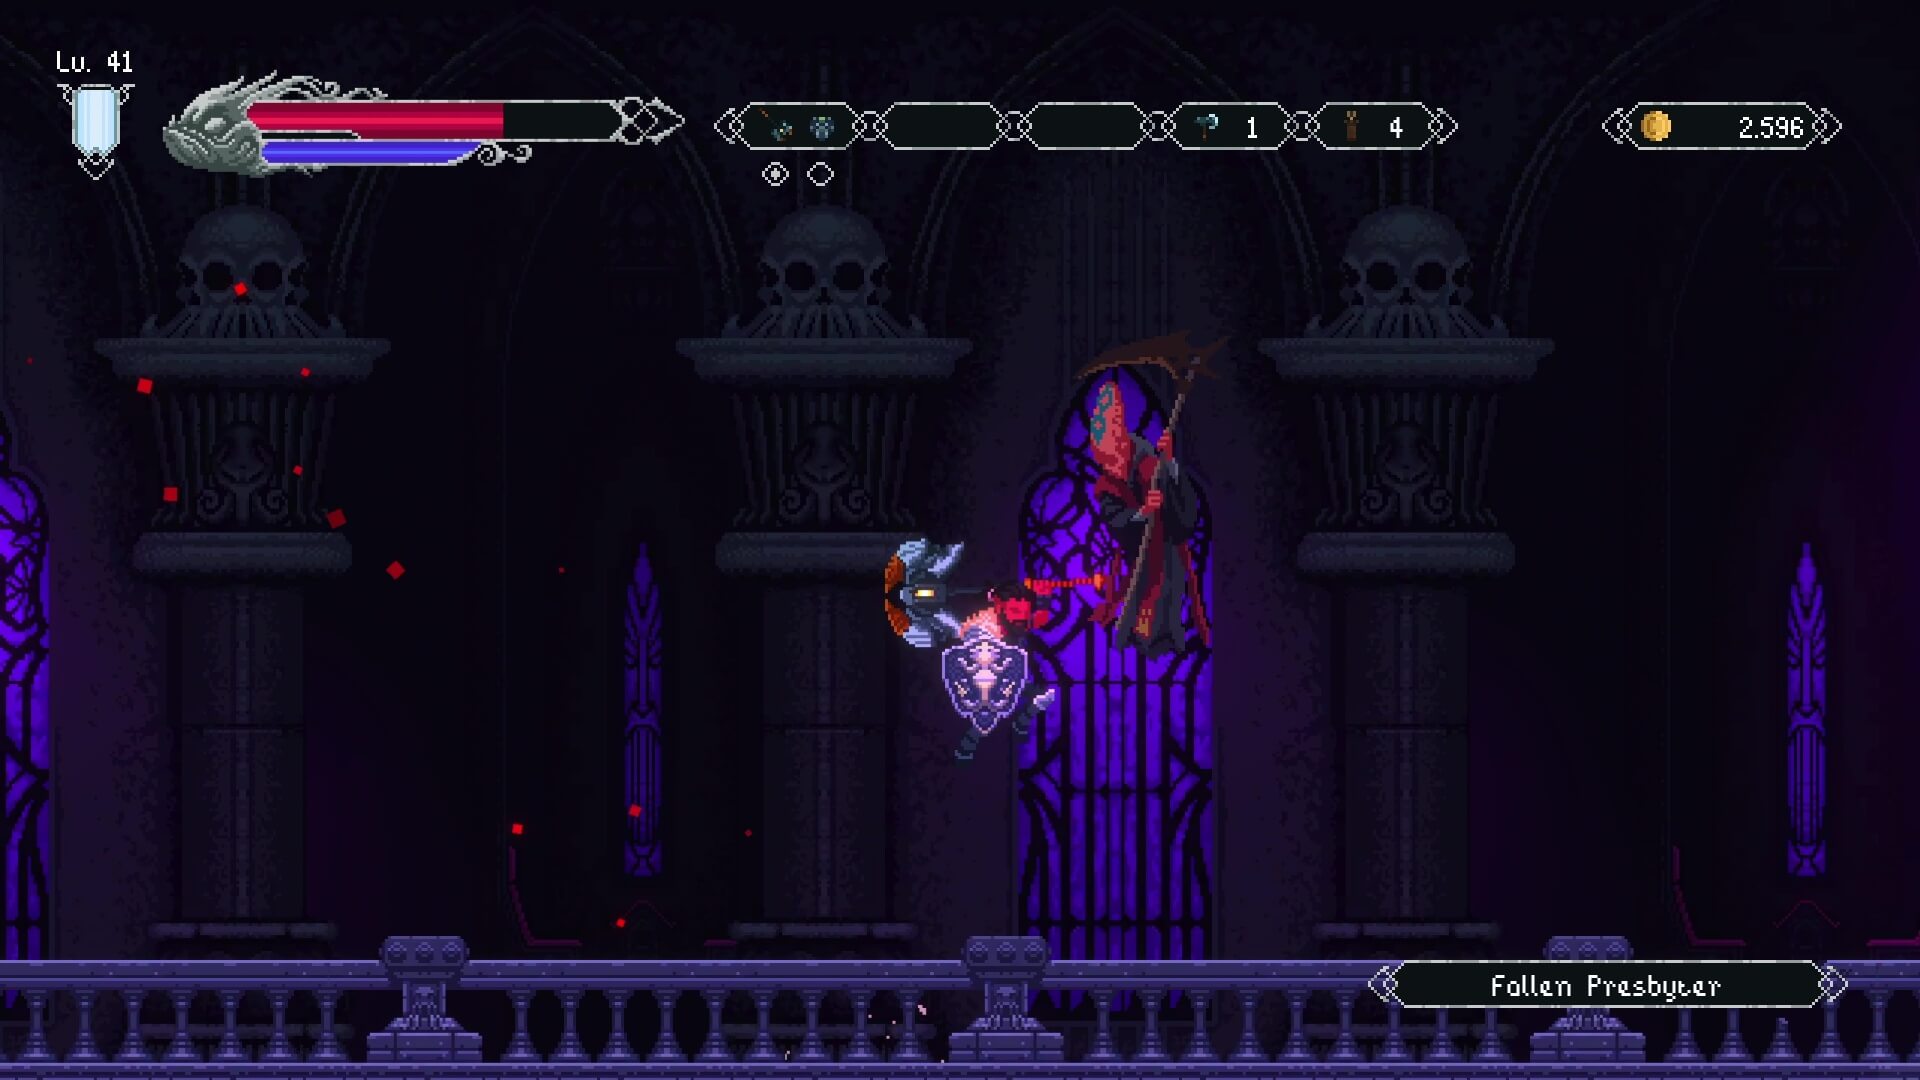 The hero fighting the Fallen Presbyter enemy, which looks like a mind flayer, in Elderand